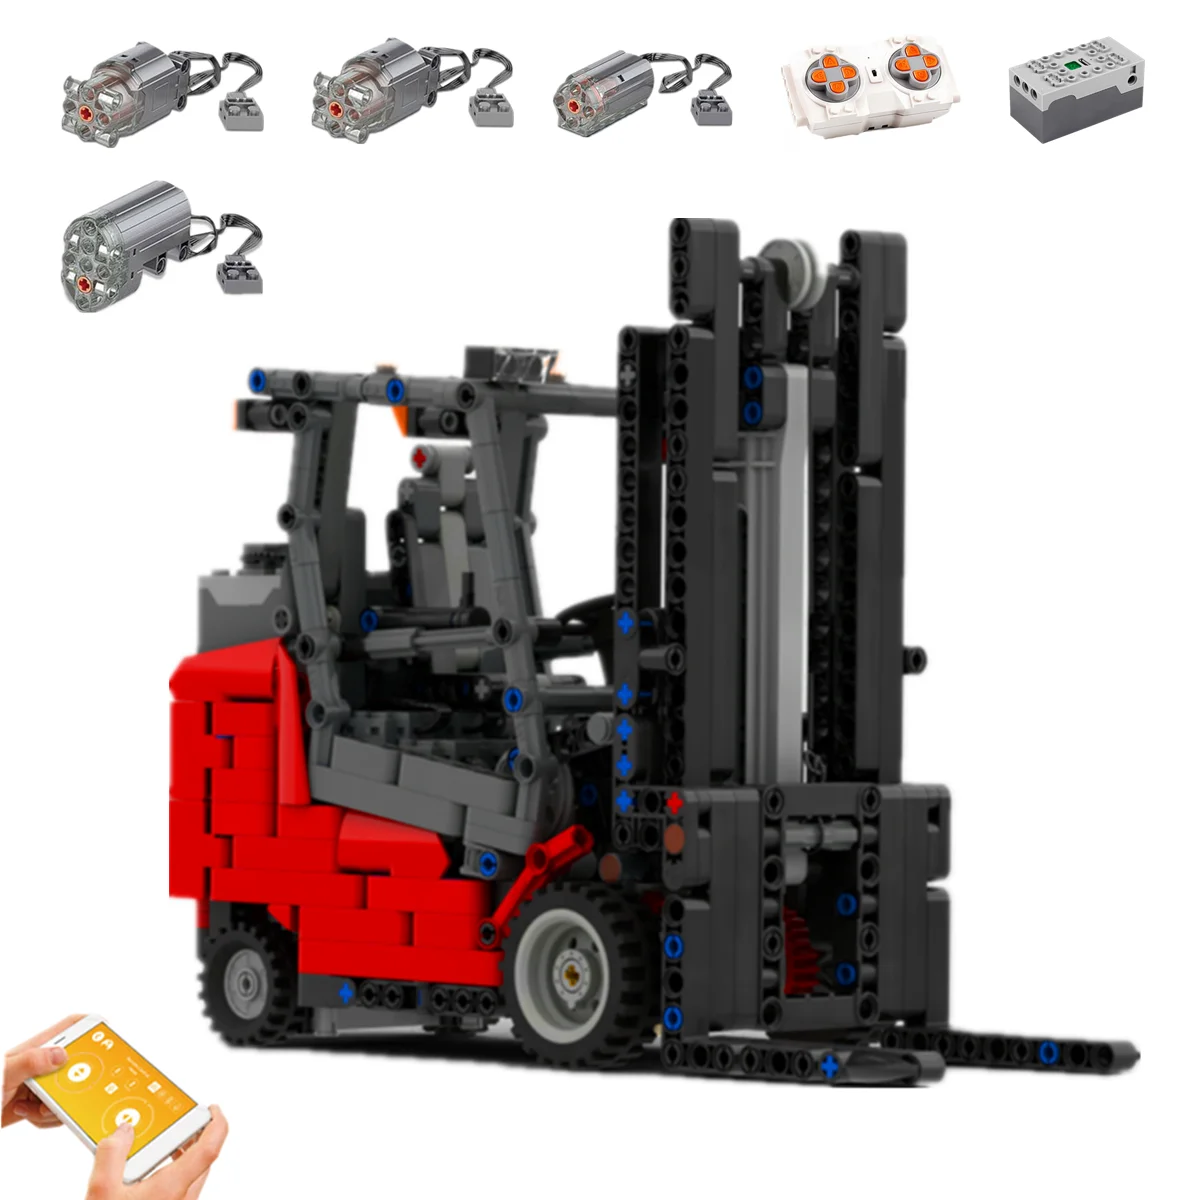 

Science and technology building block mini remote control forklift fl400 engineering vehicle assembly toy model children's gift